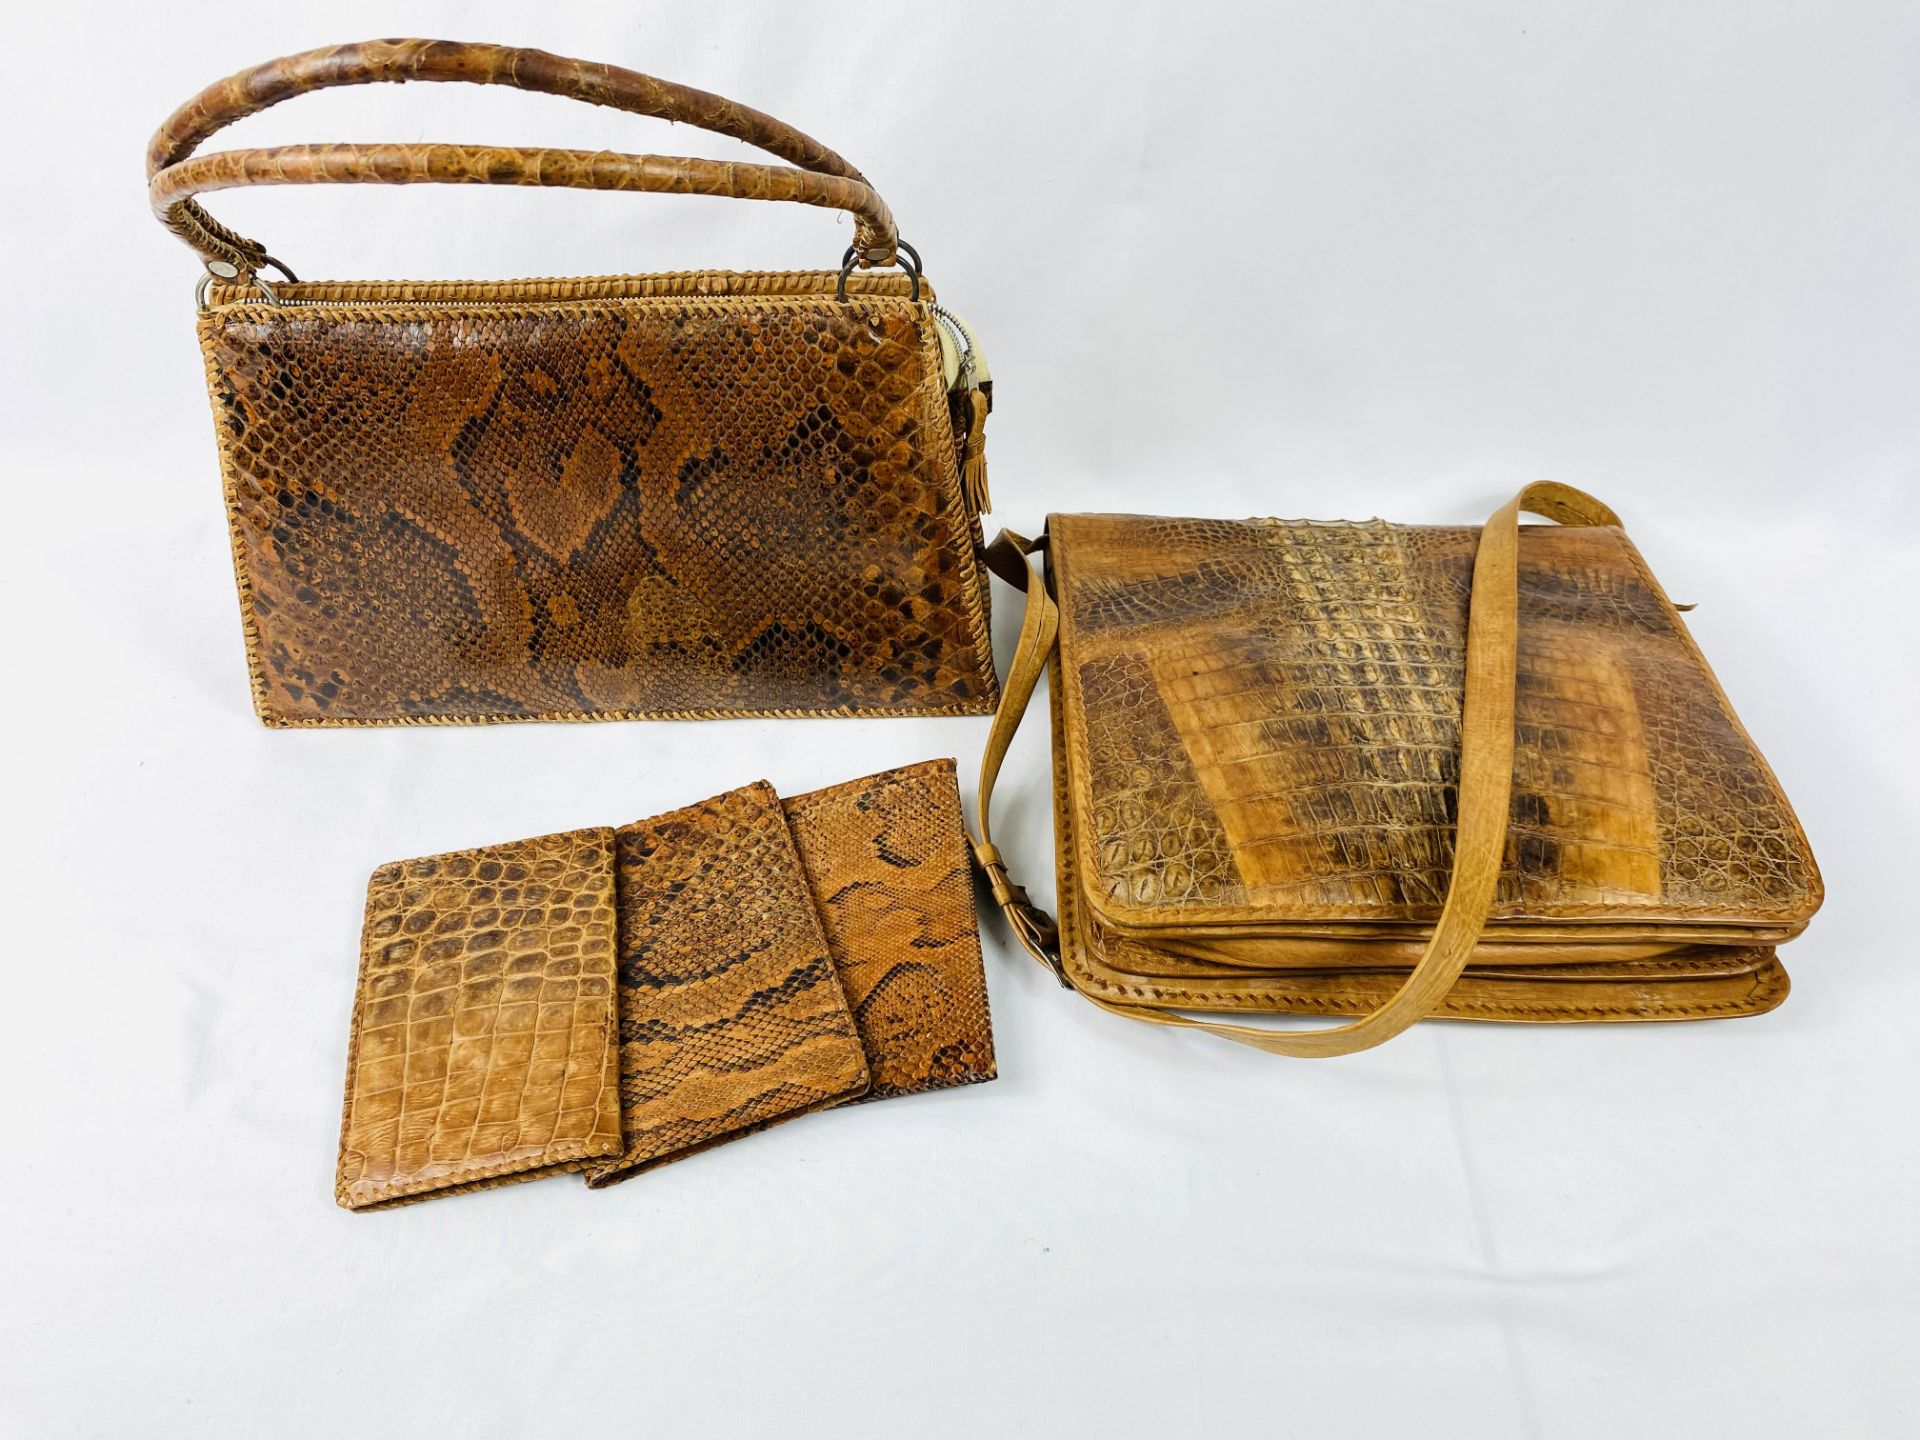 African crocodile handbag and other items. CITIES REGULATIONS APPLY TO THIS LOT.